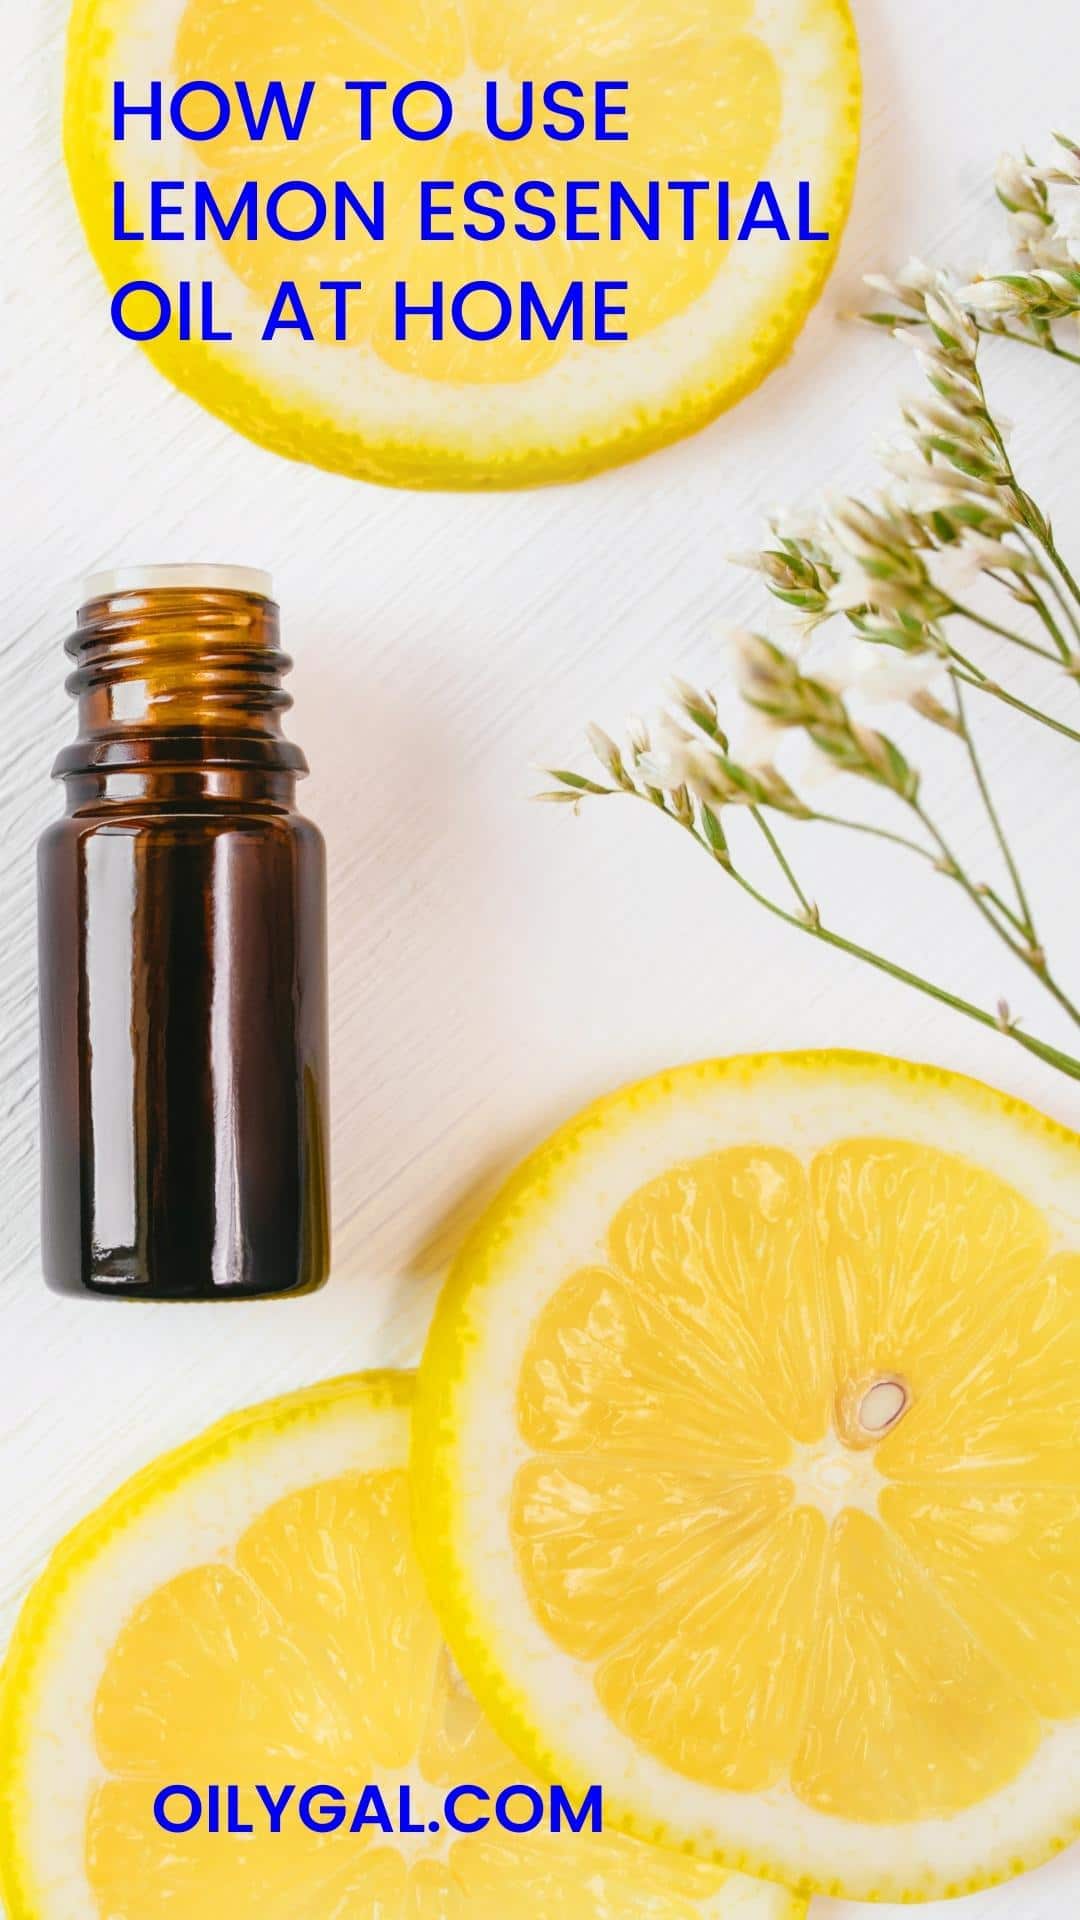 How to Use Lemon Essential Oil at Home